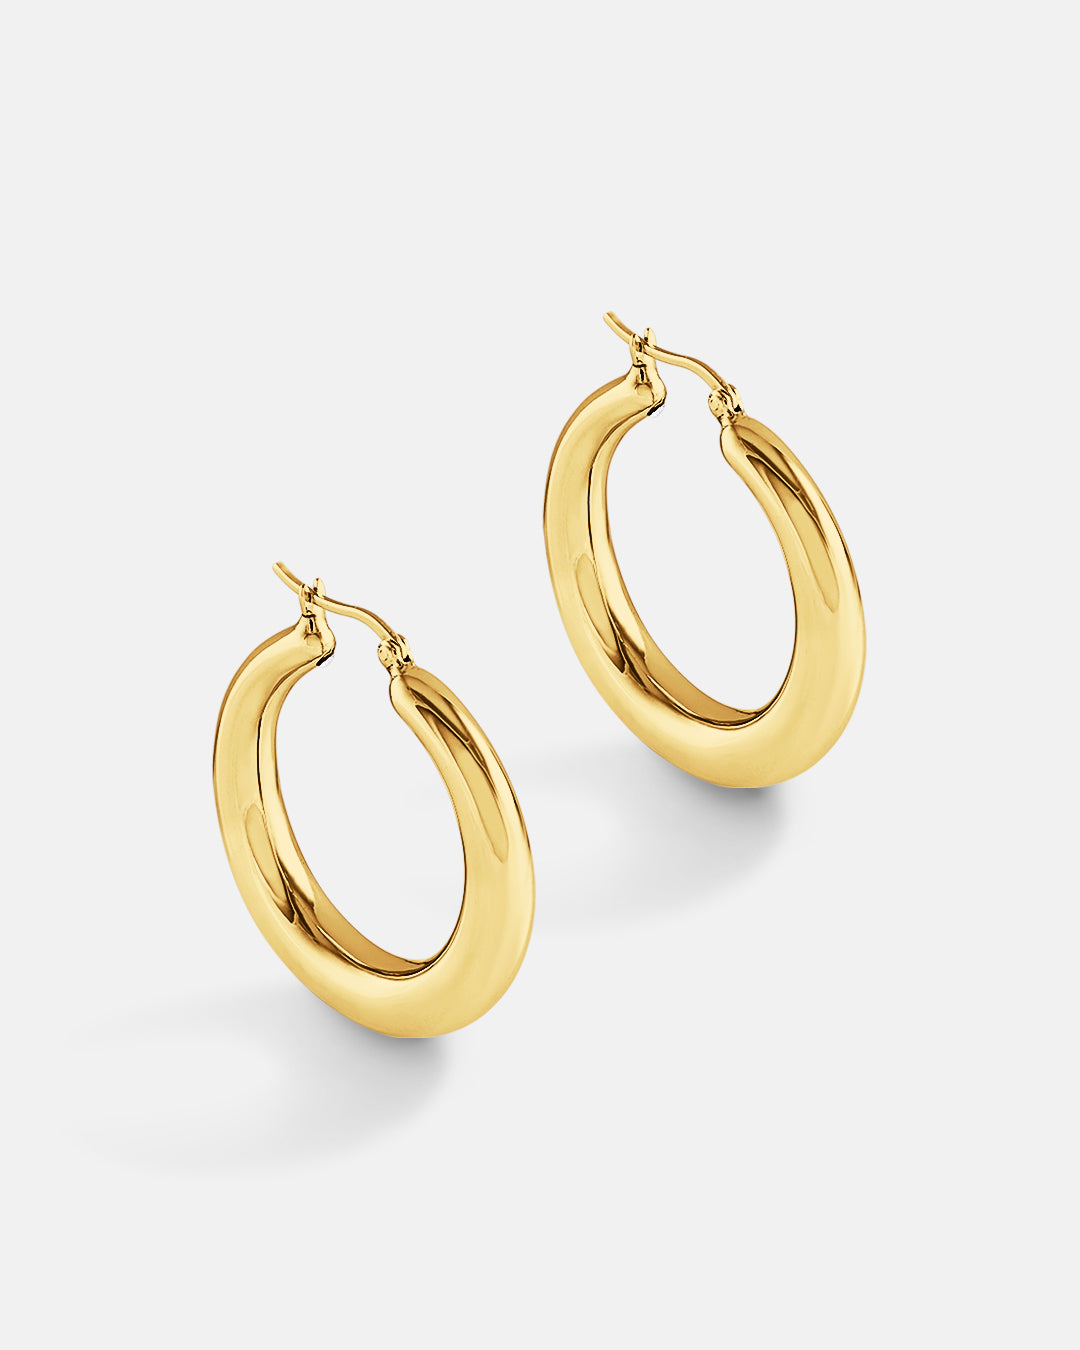 This is the product picture of a classic chunky hoop earrings plated in gold in sterling silver material